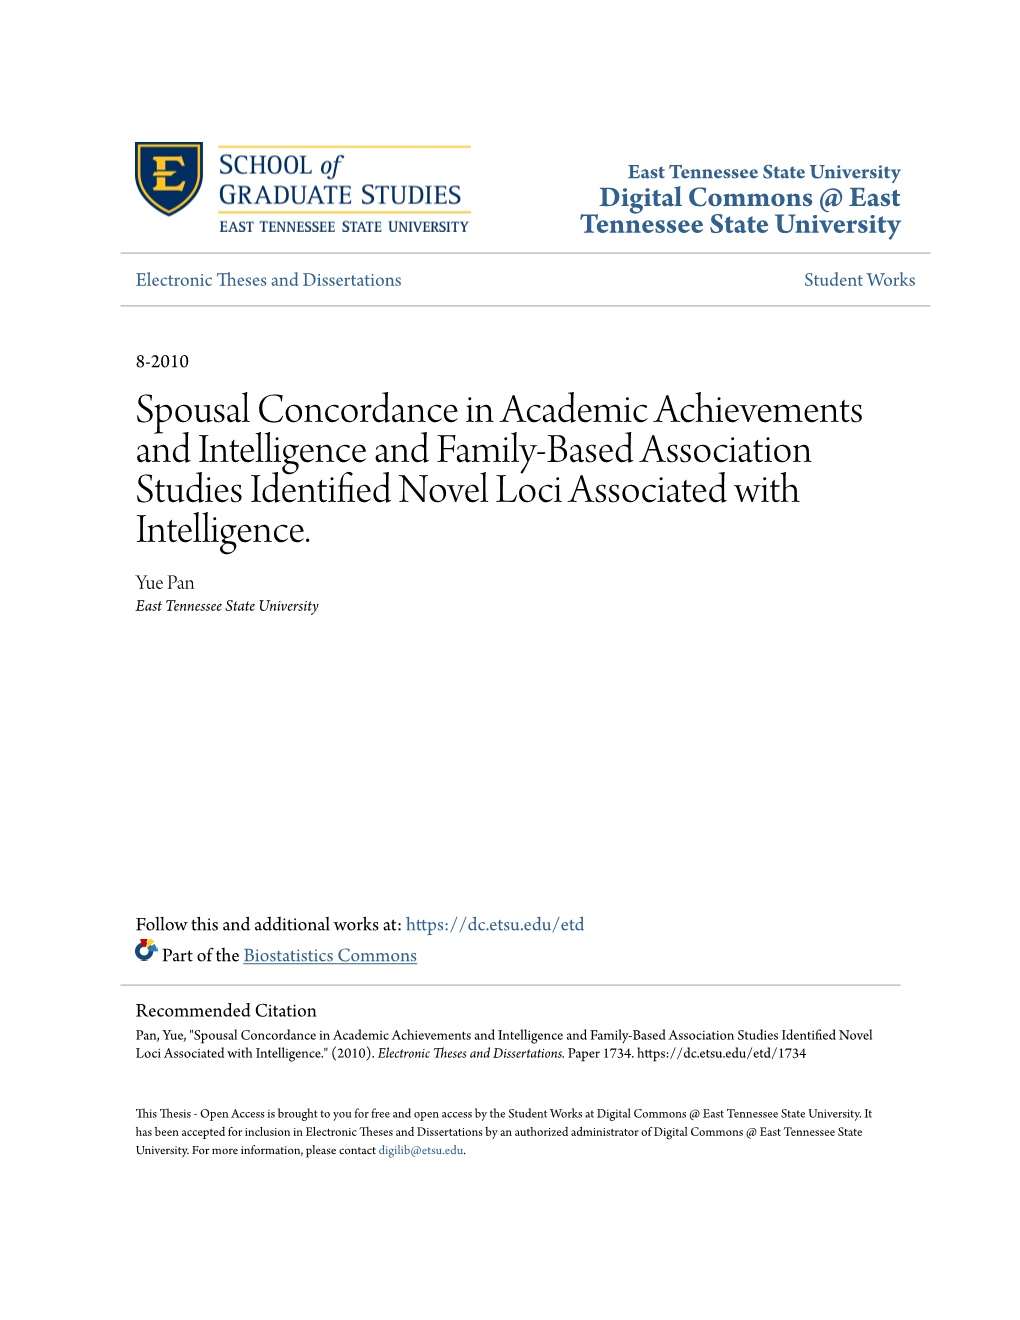 Spousal Concordance in Academic Achievements and Intelligence and Family-Based Association Studies Identified on Vel Loci Associated with Intelligence